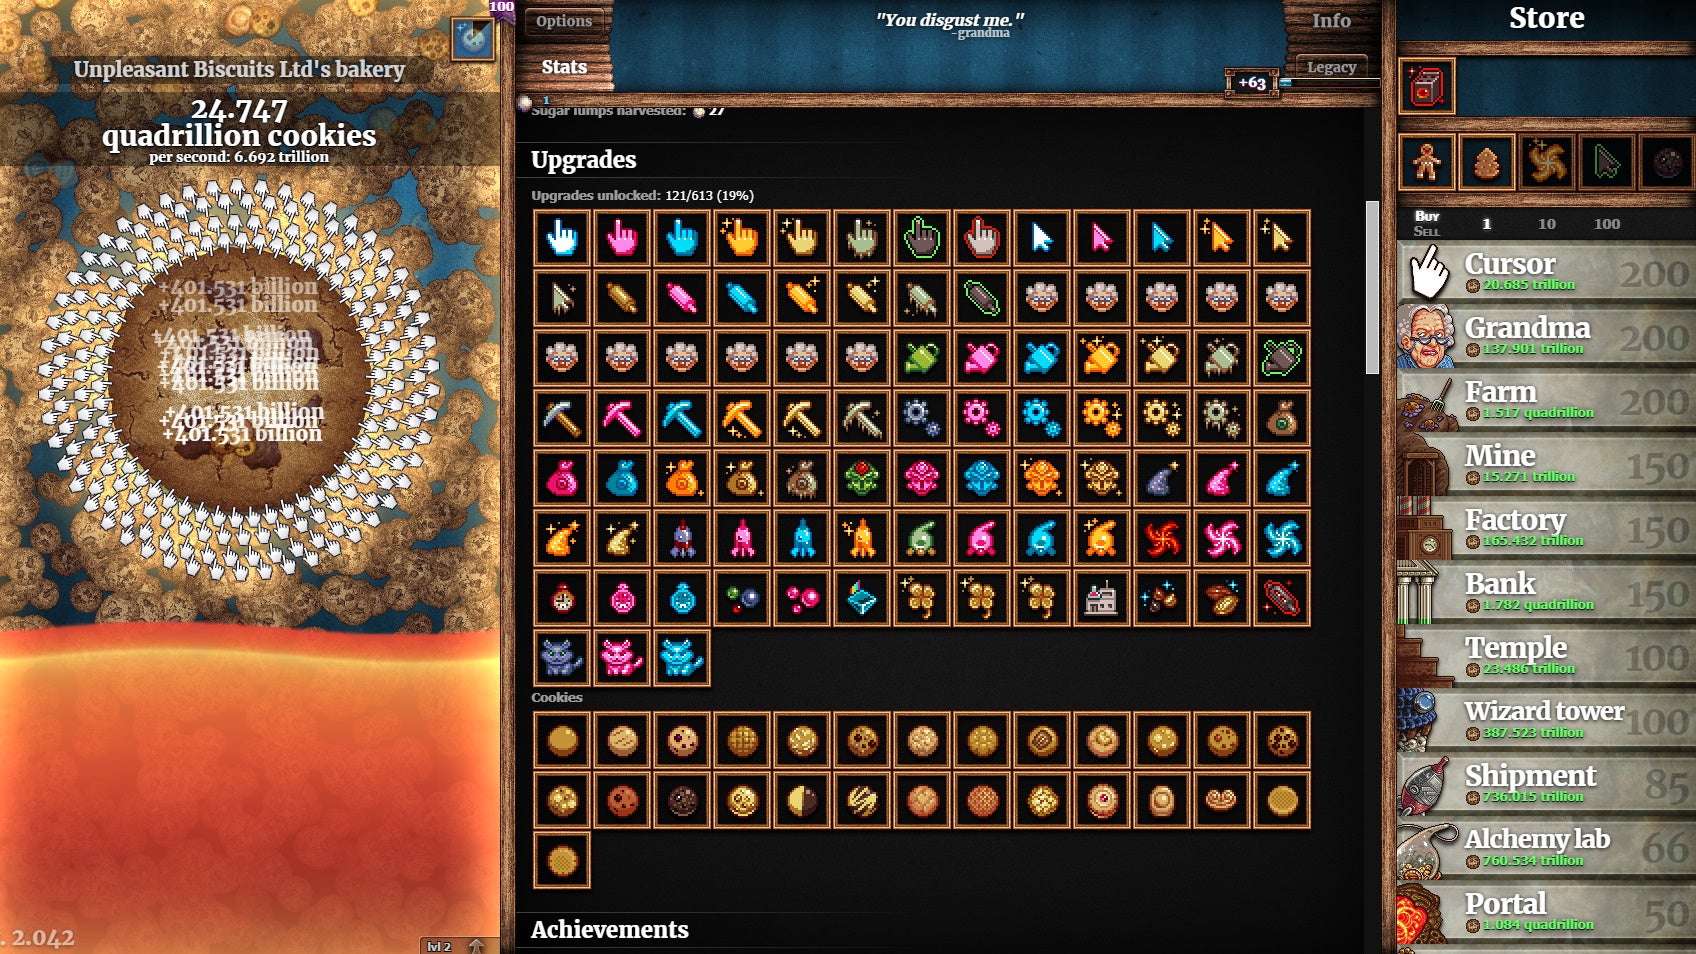 I just decided to play Cookie Clicker a while ago but idk how I'm